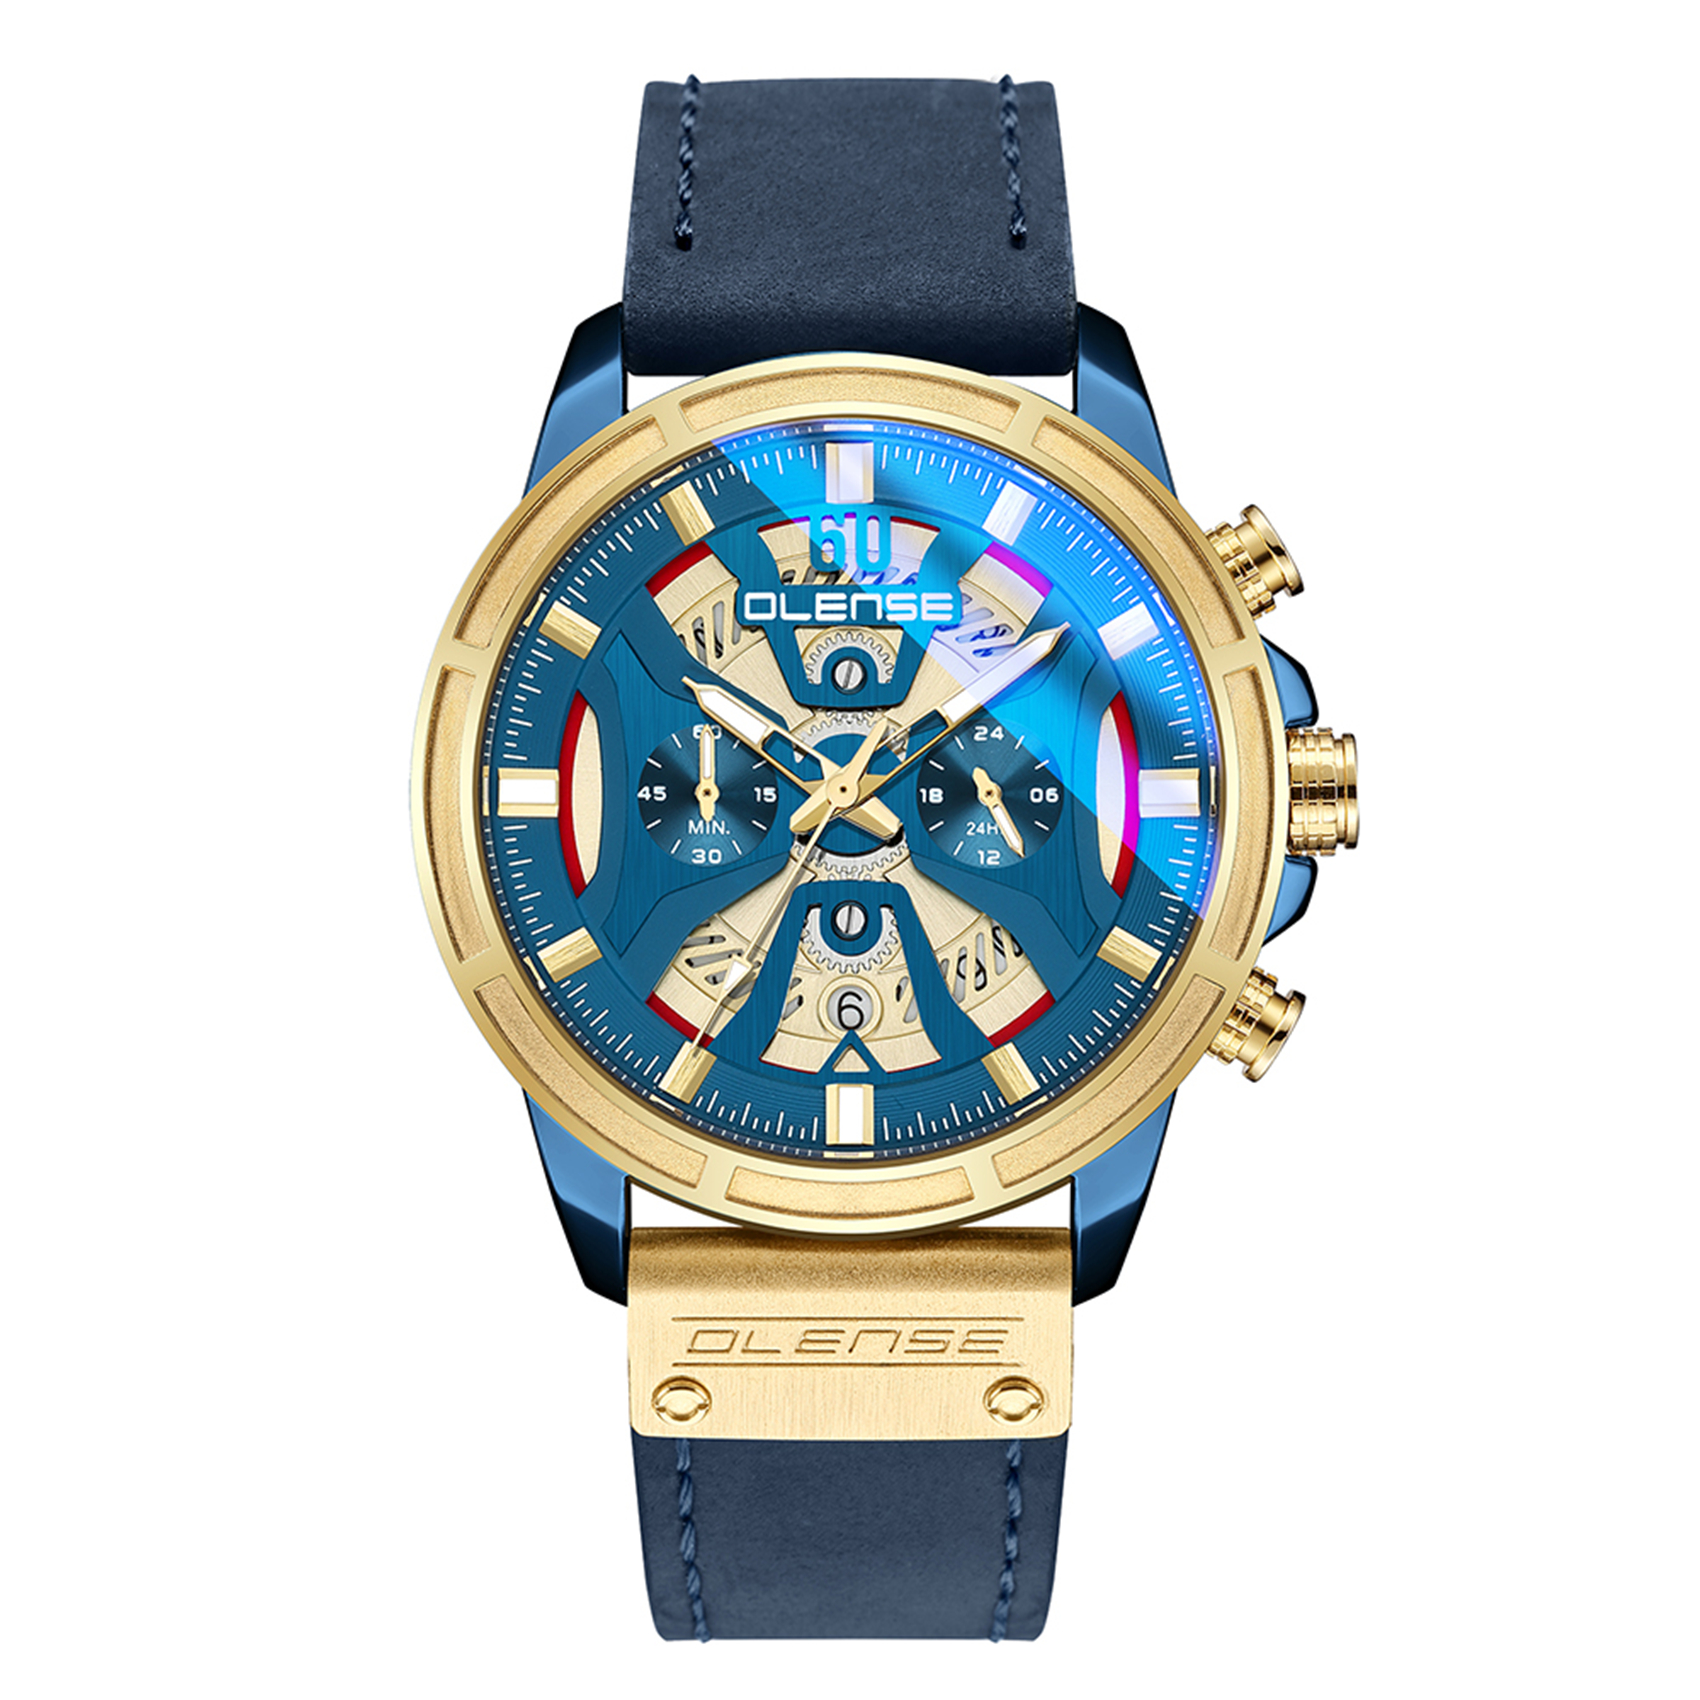 OLENSE - Sports Watch for Men, Quartz, Leather Band, Waterproof, 47mm, Analog Display, Gold & Blue